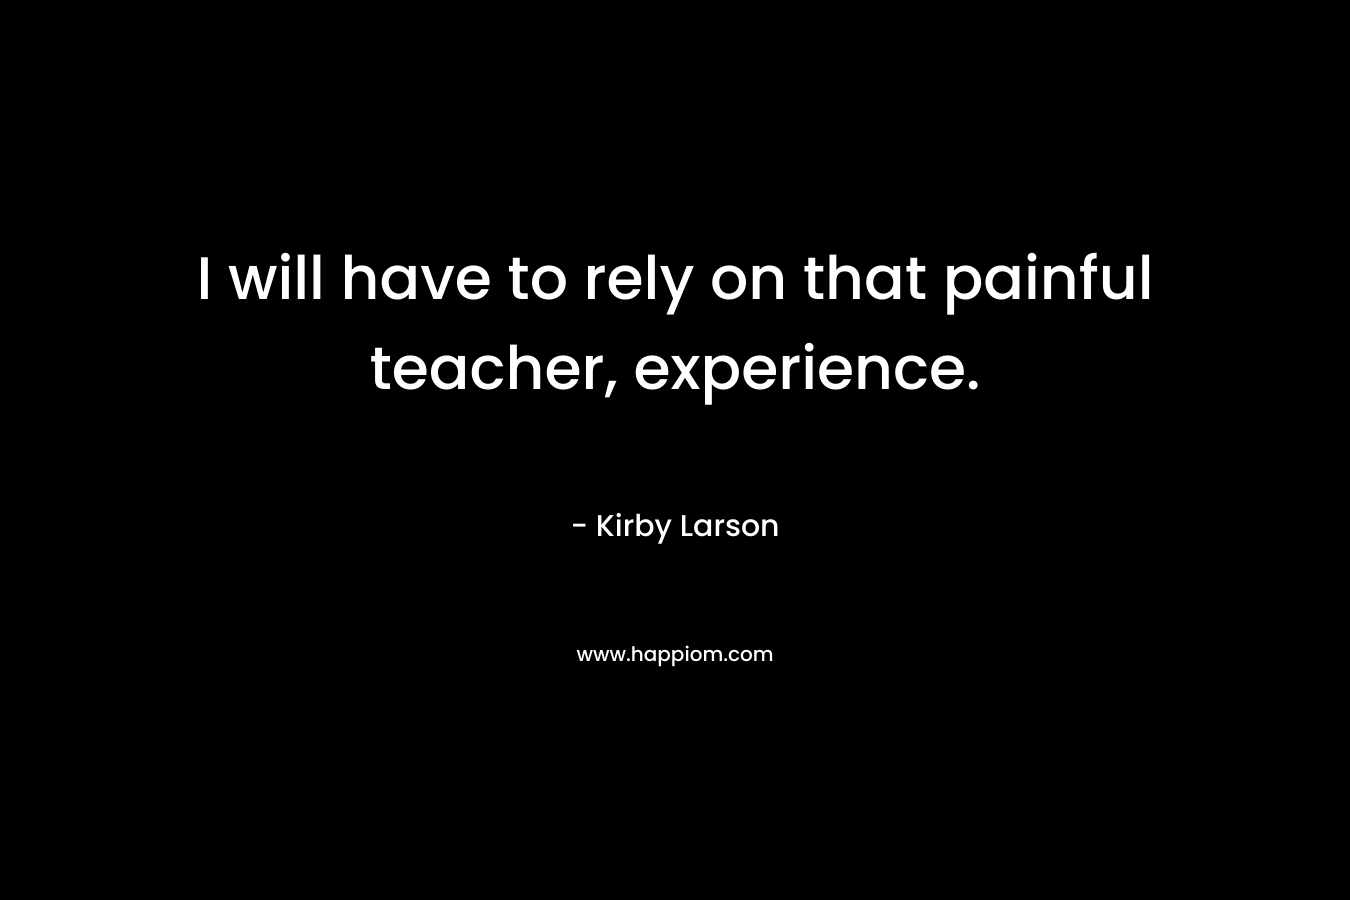 I will have to rely on that painful teacher, experience. – Kirby Larson